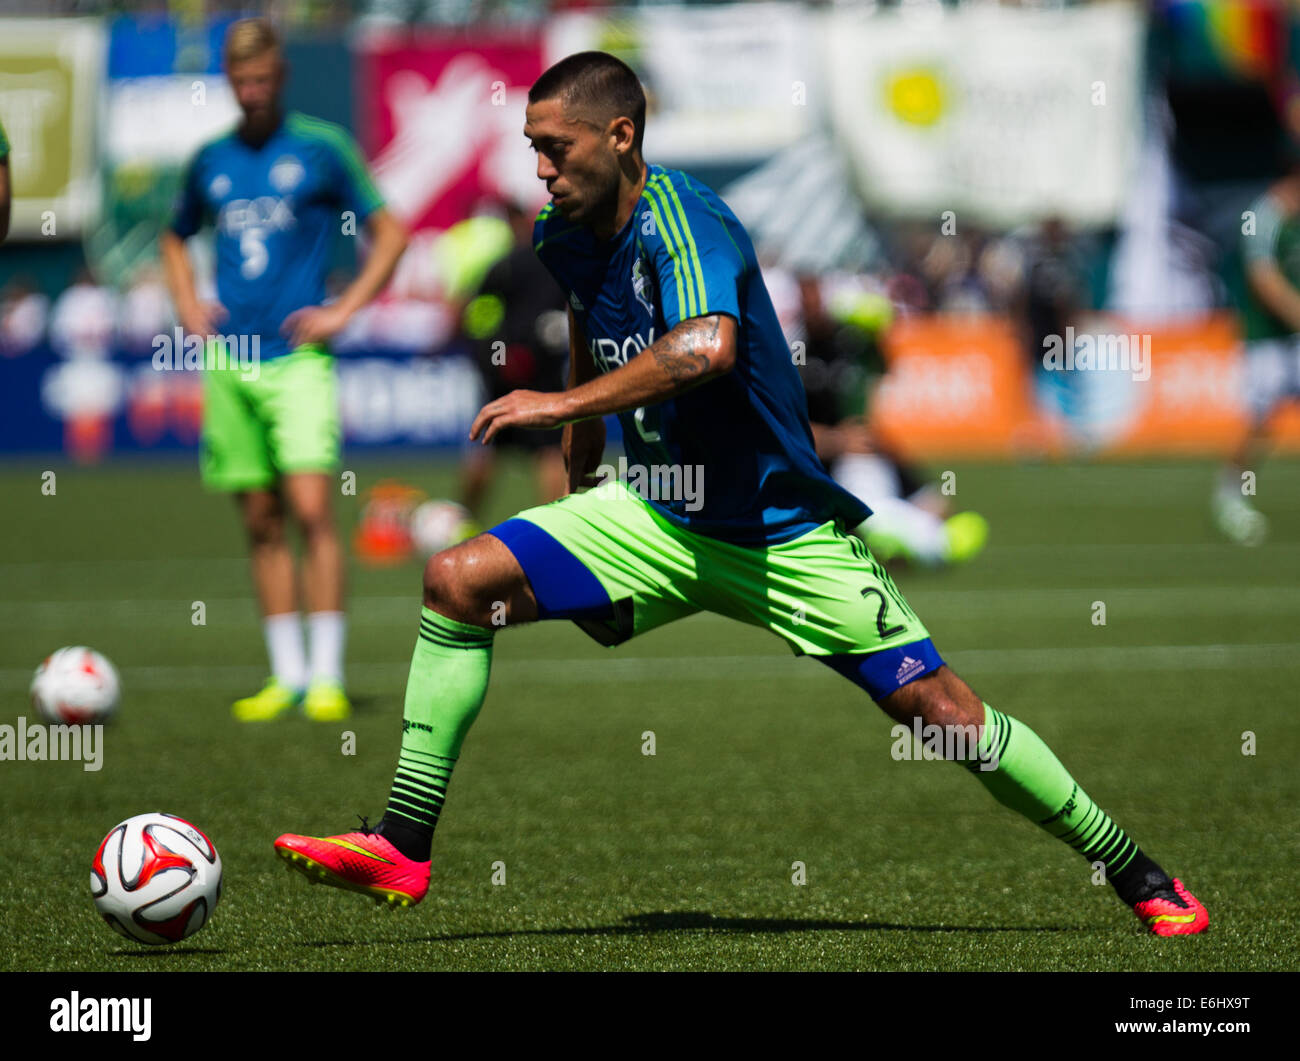 Aug. 24, 2014 - CLINT DEMPSEY (2) warms up before the game. The Portland Timbers FC play the Seattle Sounders FC at Providence Park on August 24, 2014. © David Blair/ZUMA Wire/Alamy Live News Stock Photo